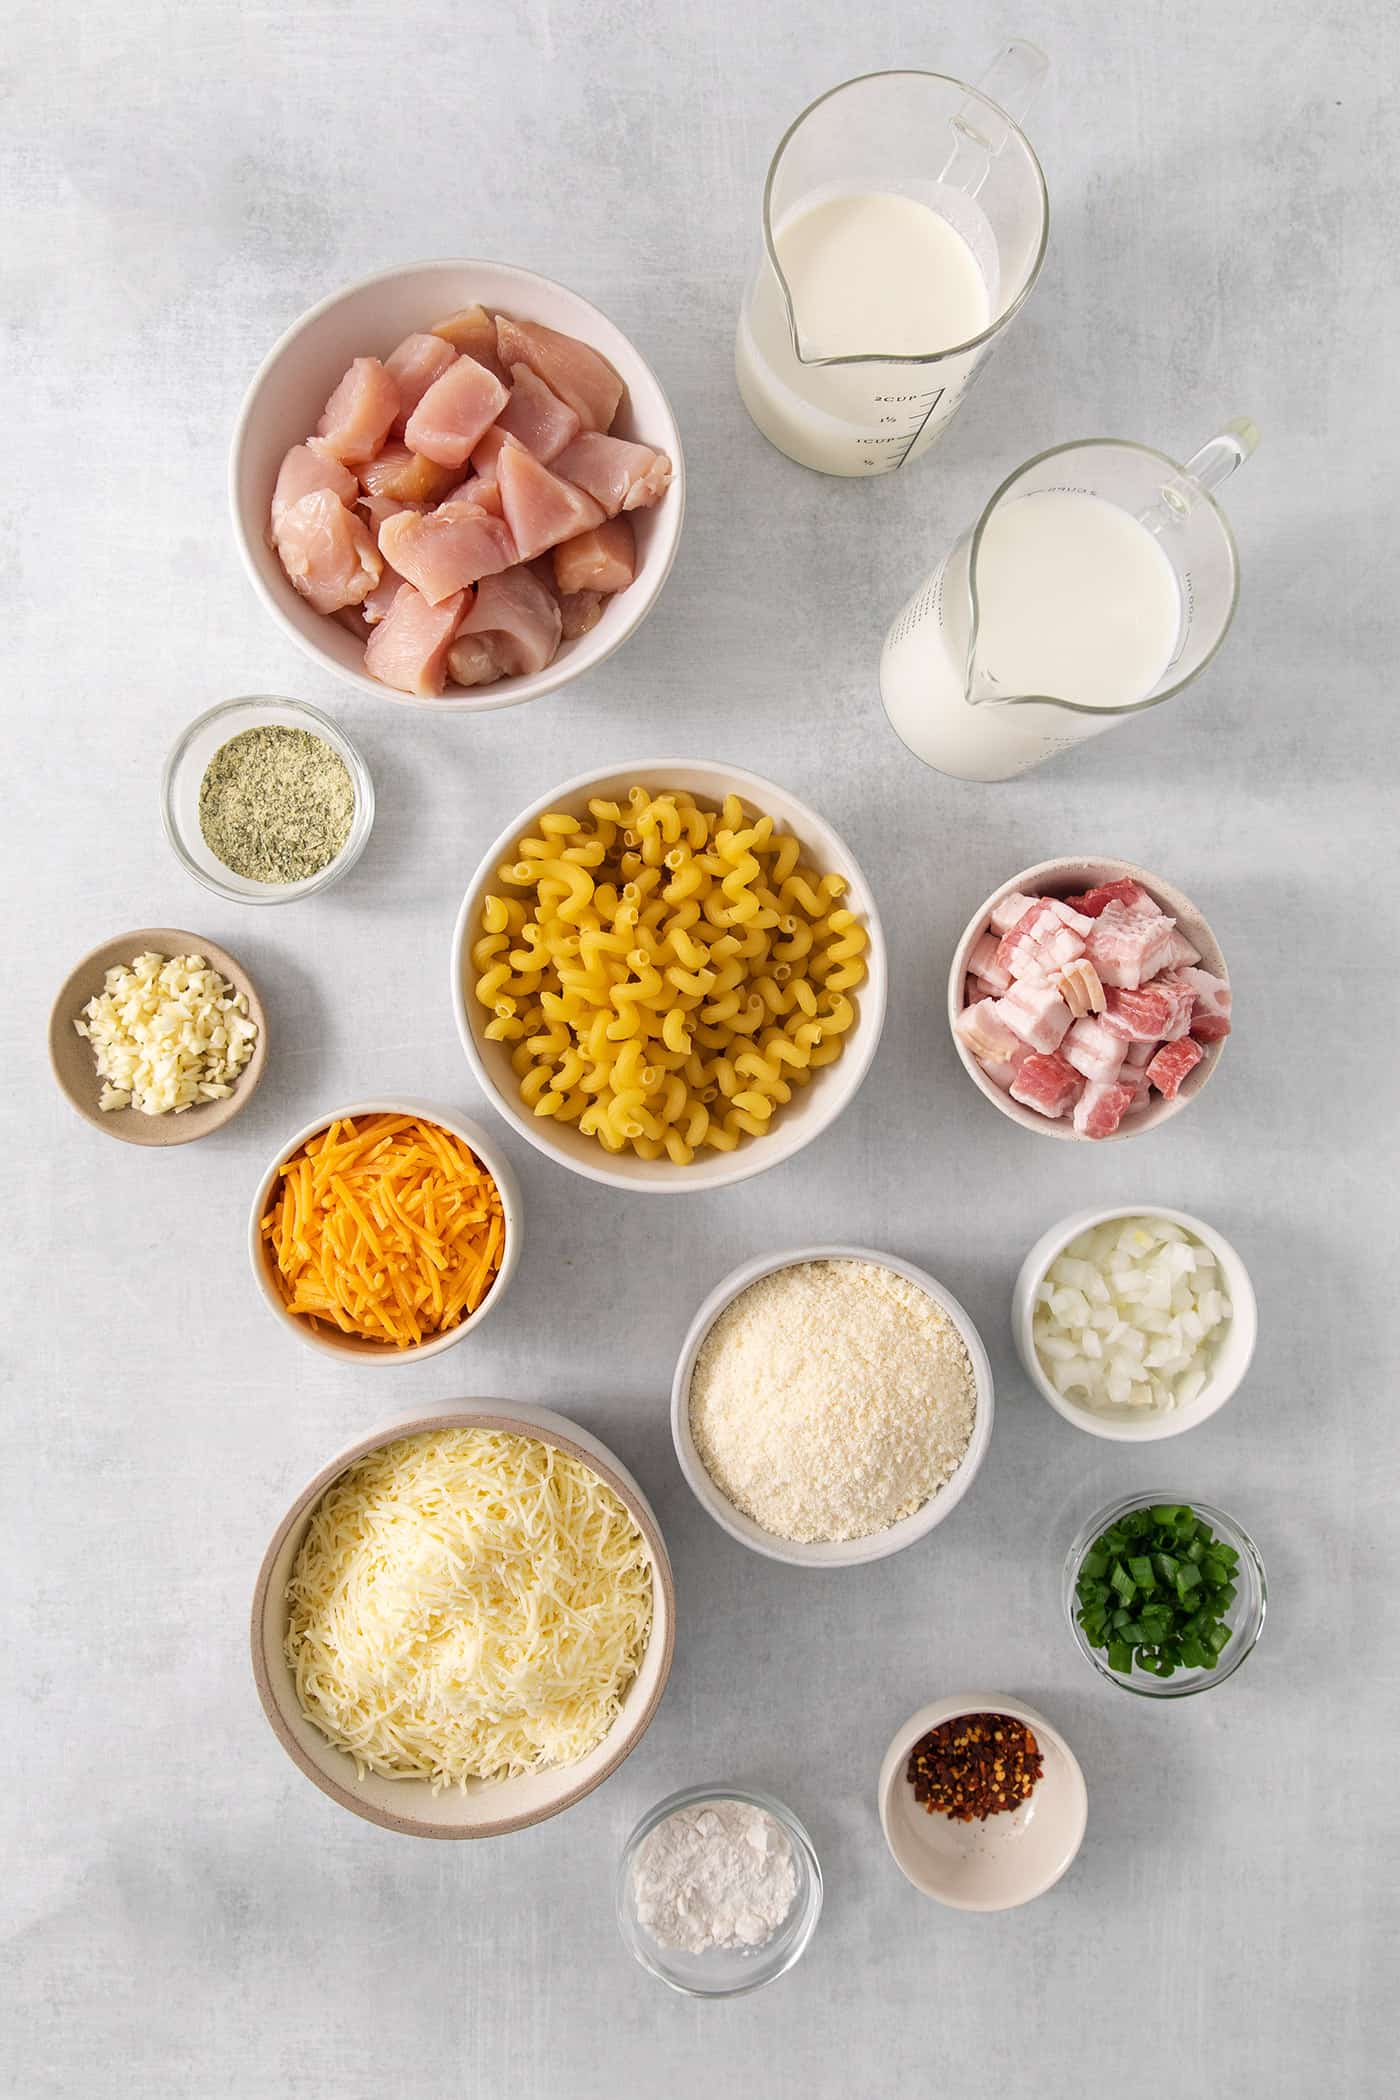 Ingredients needed to make chicken bacon ranch pasta are shown, including pasta, chicken, cheeses, bacon, and green onions.